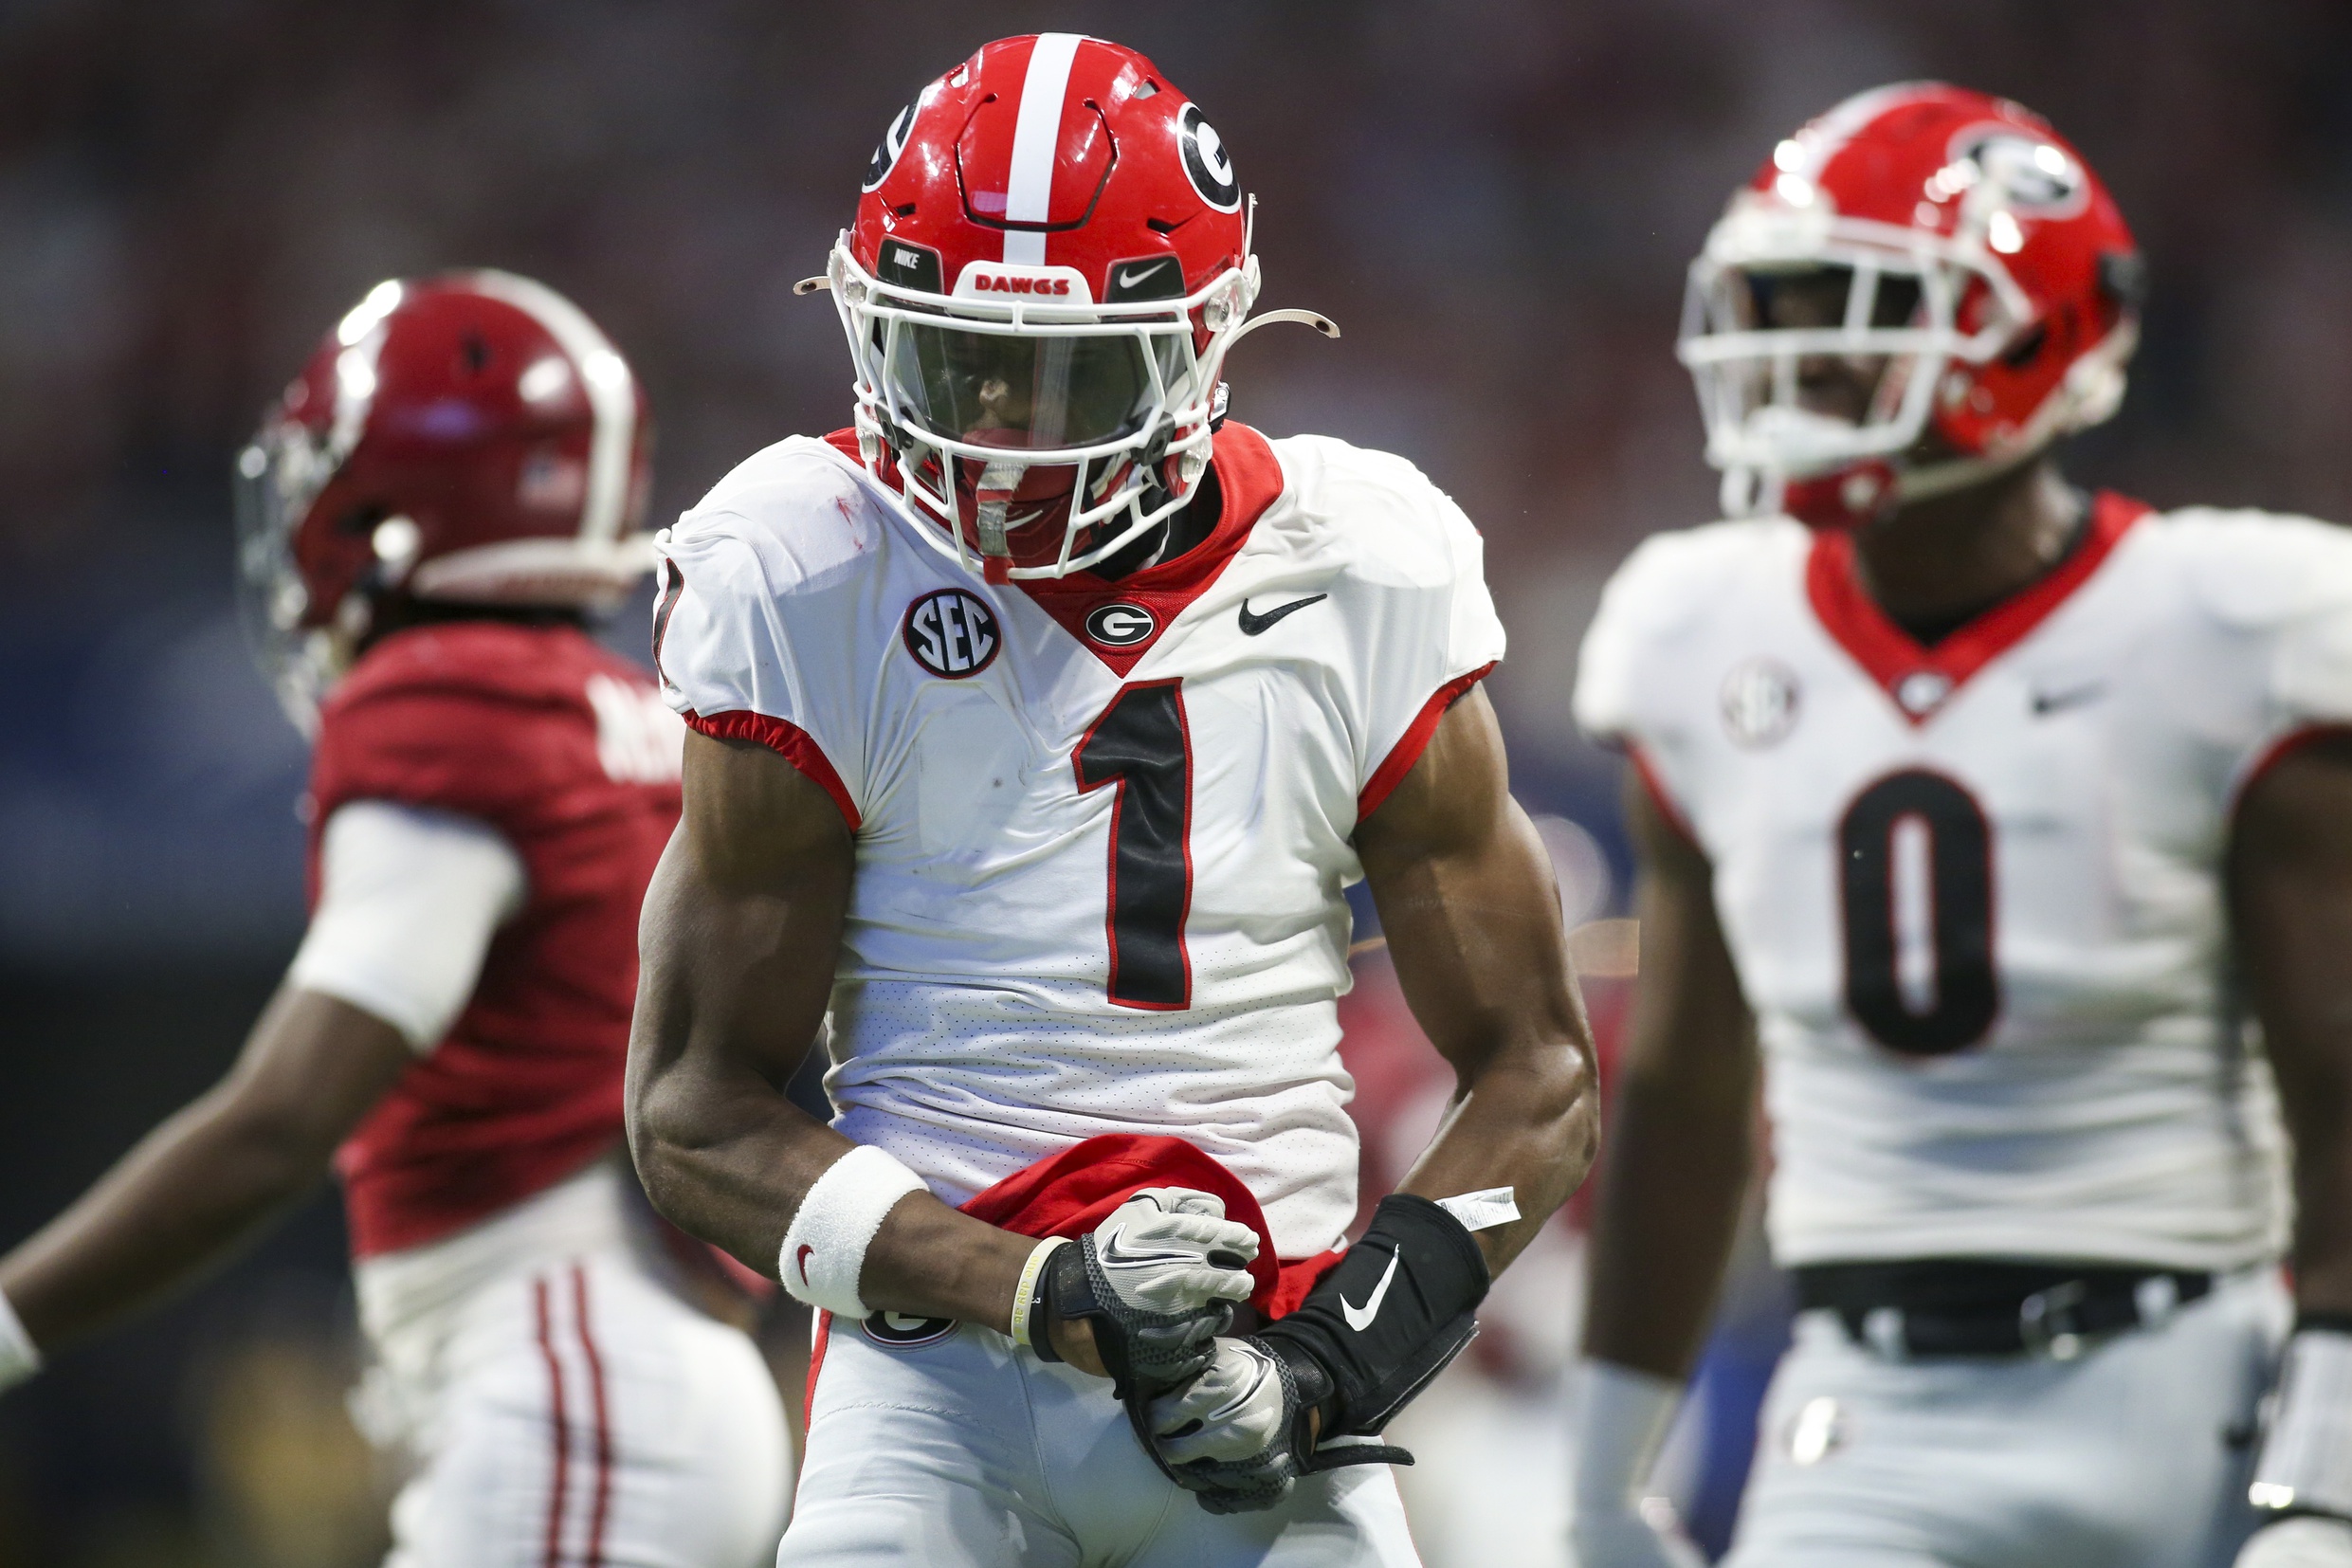 2022 NFL Draft: Overrated wide receivers based on WROPS, RAS, and